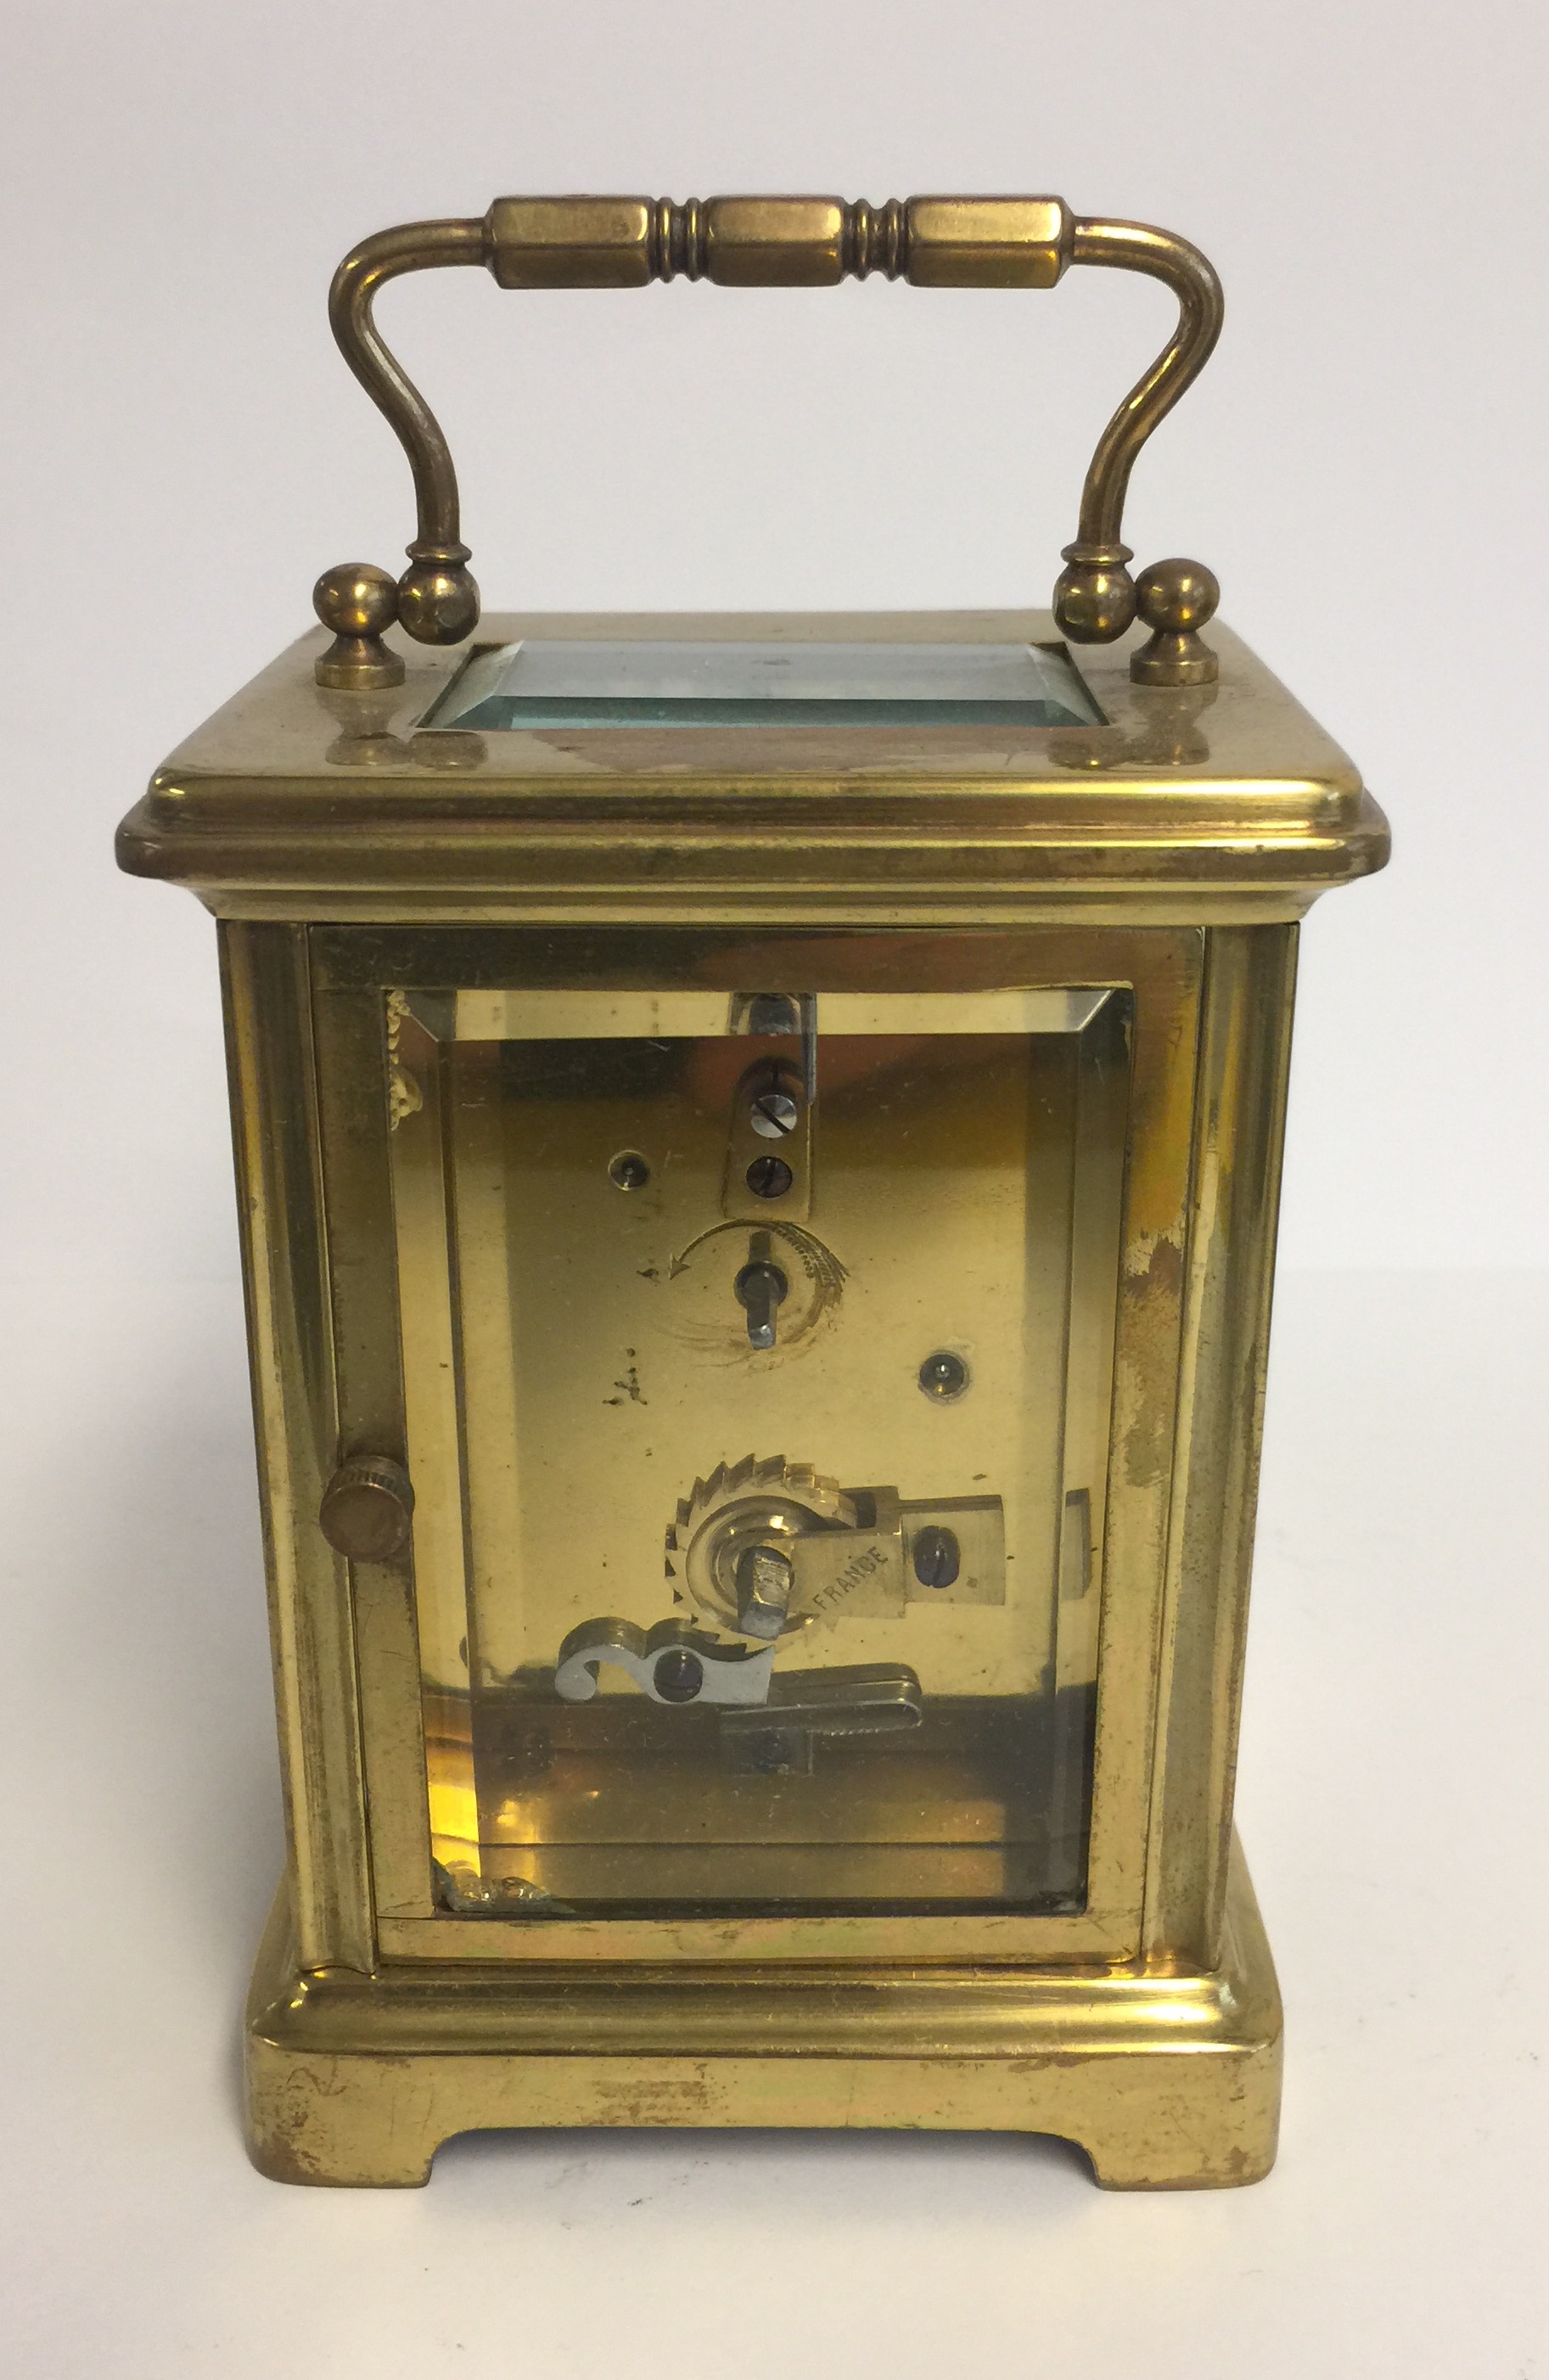 AN EARLY 20TH CENTURY BRASS CASED CARRIAGE CLOCK. (11cm x 8cm x 6cm) - Image 3 of 5